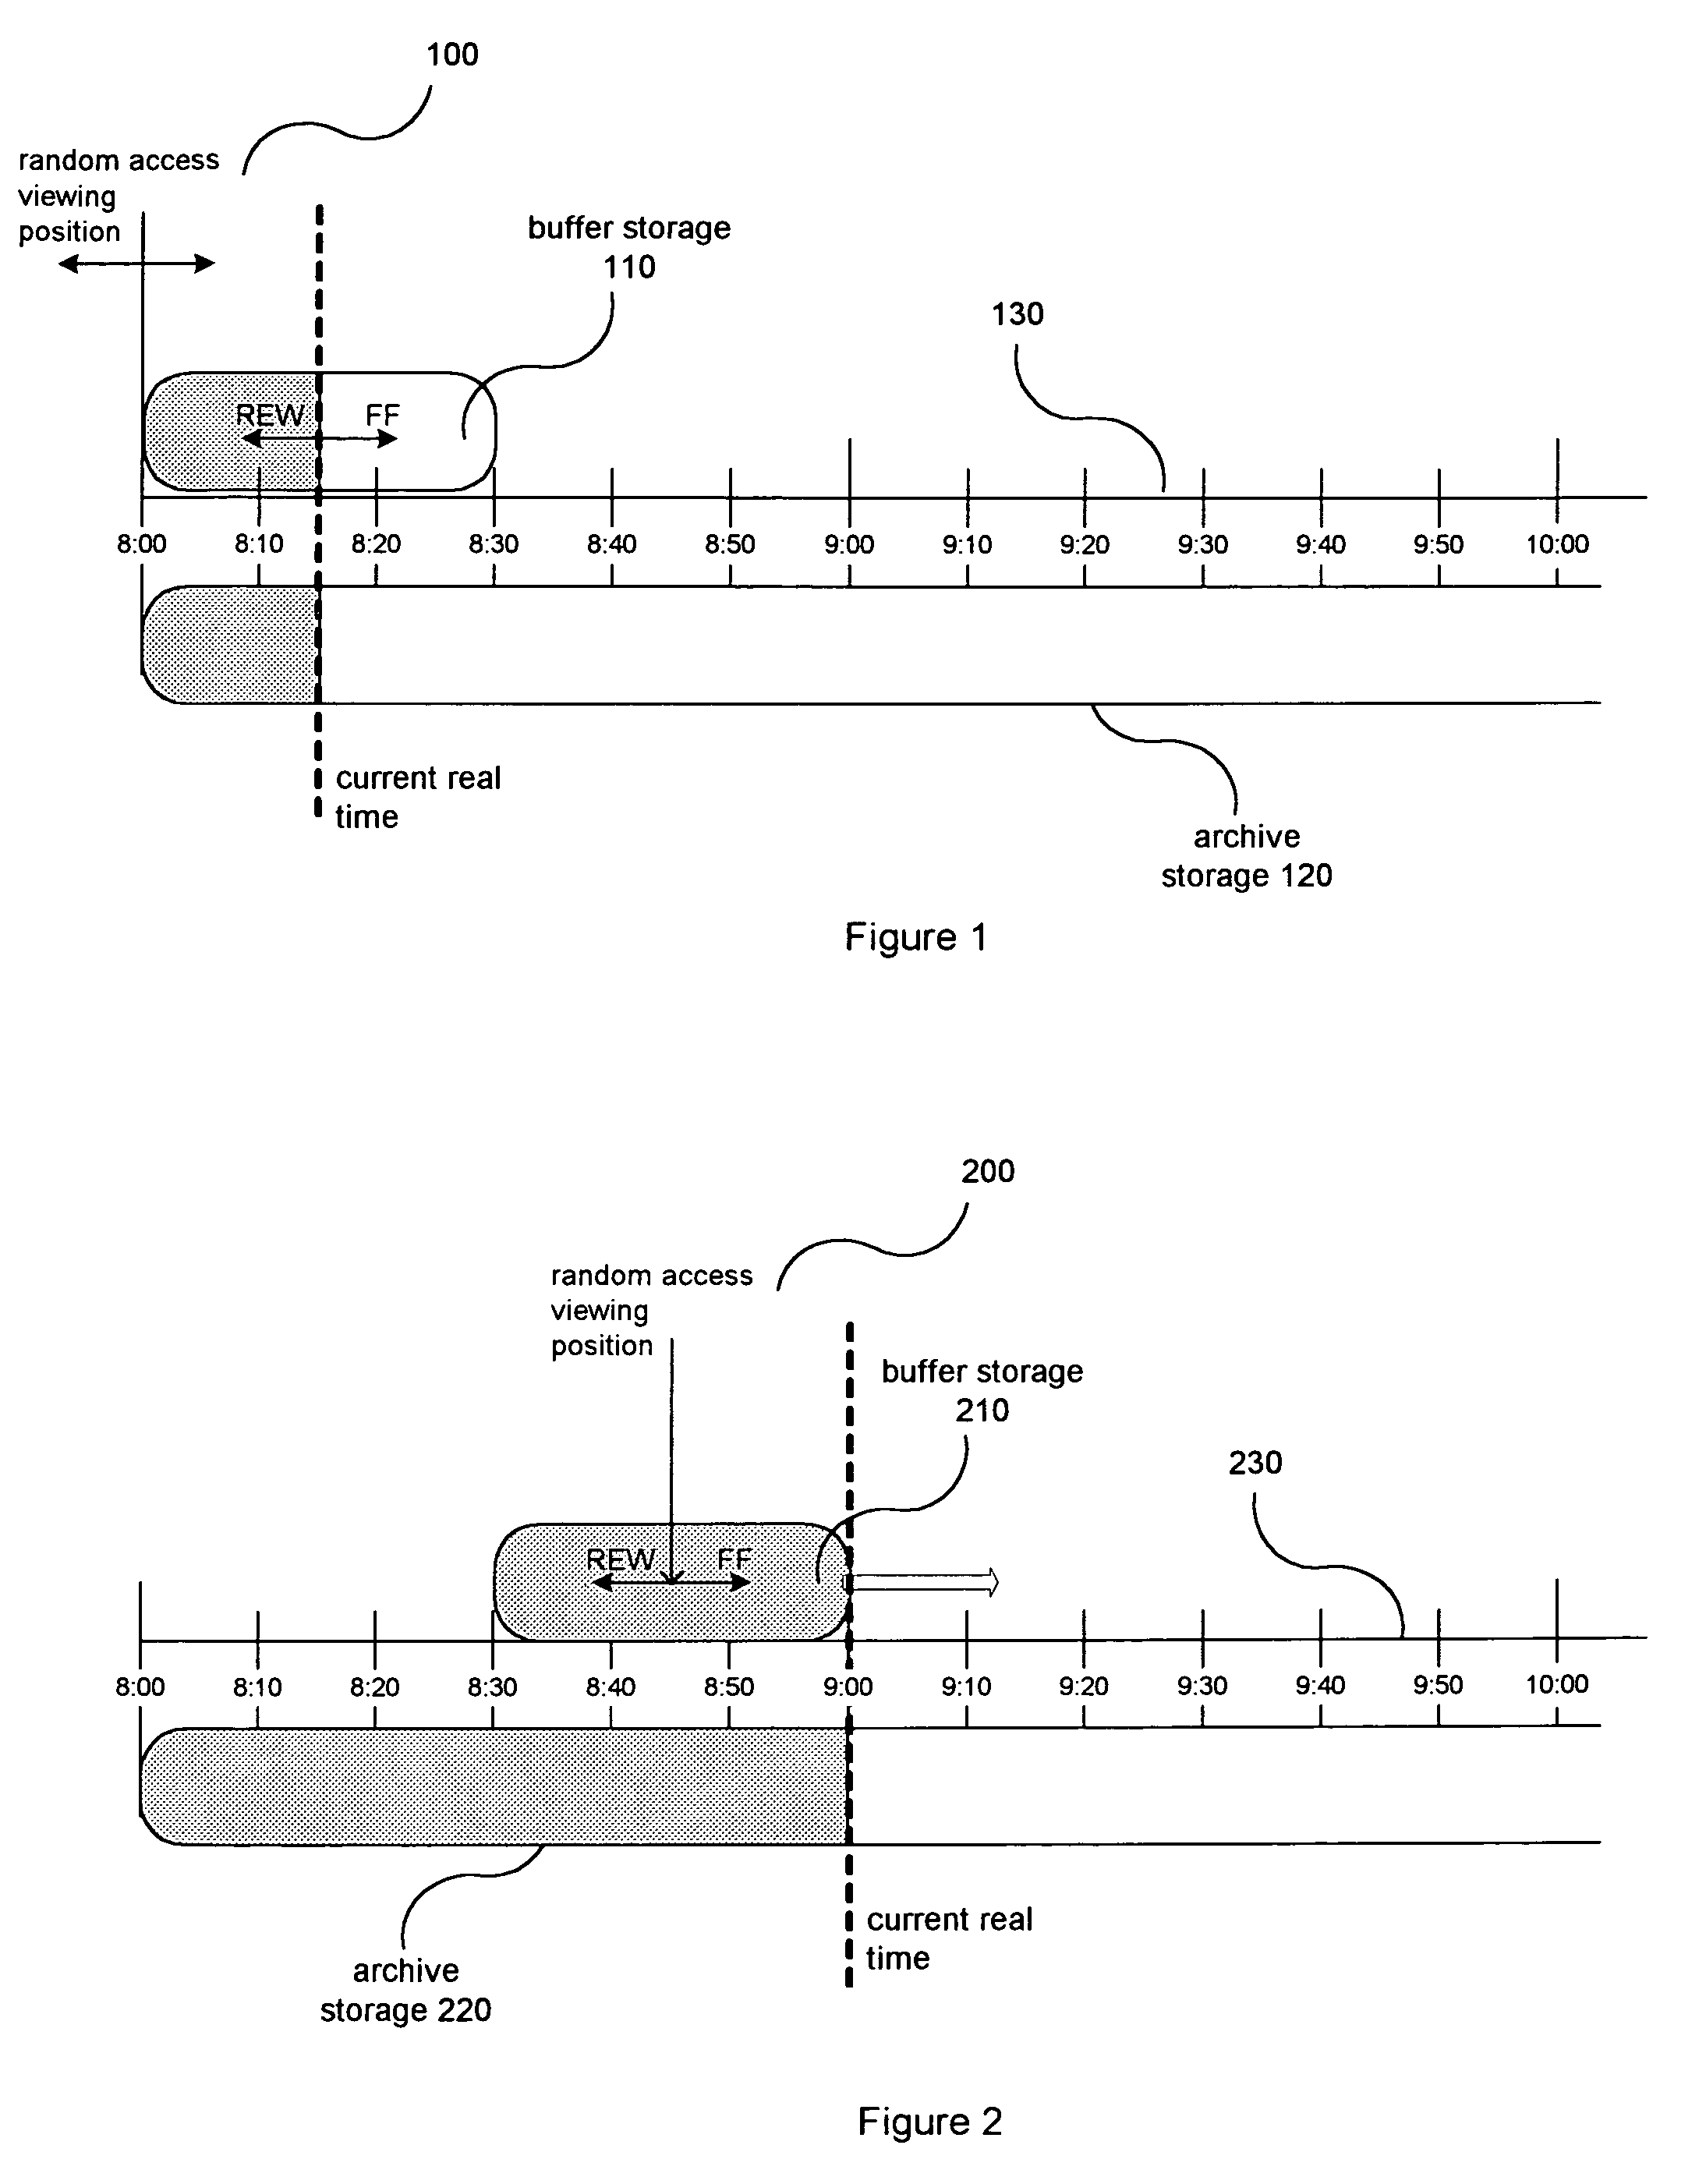 System and method for time-shifted program viewing